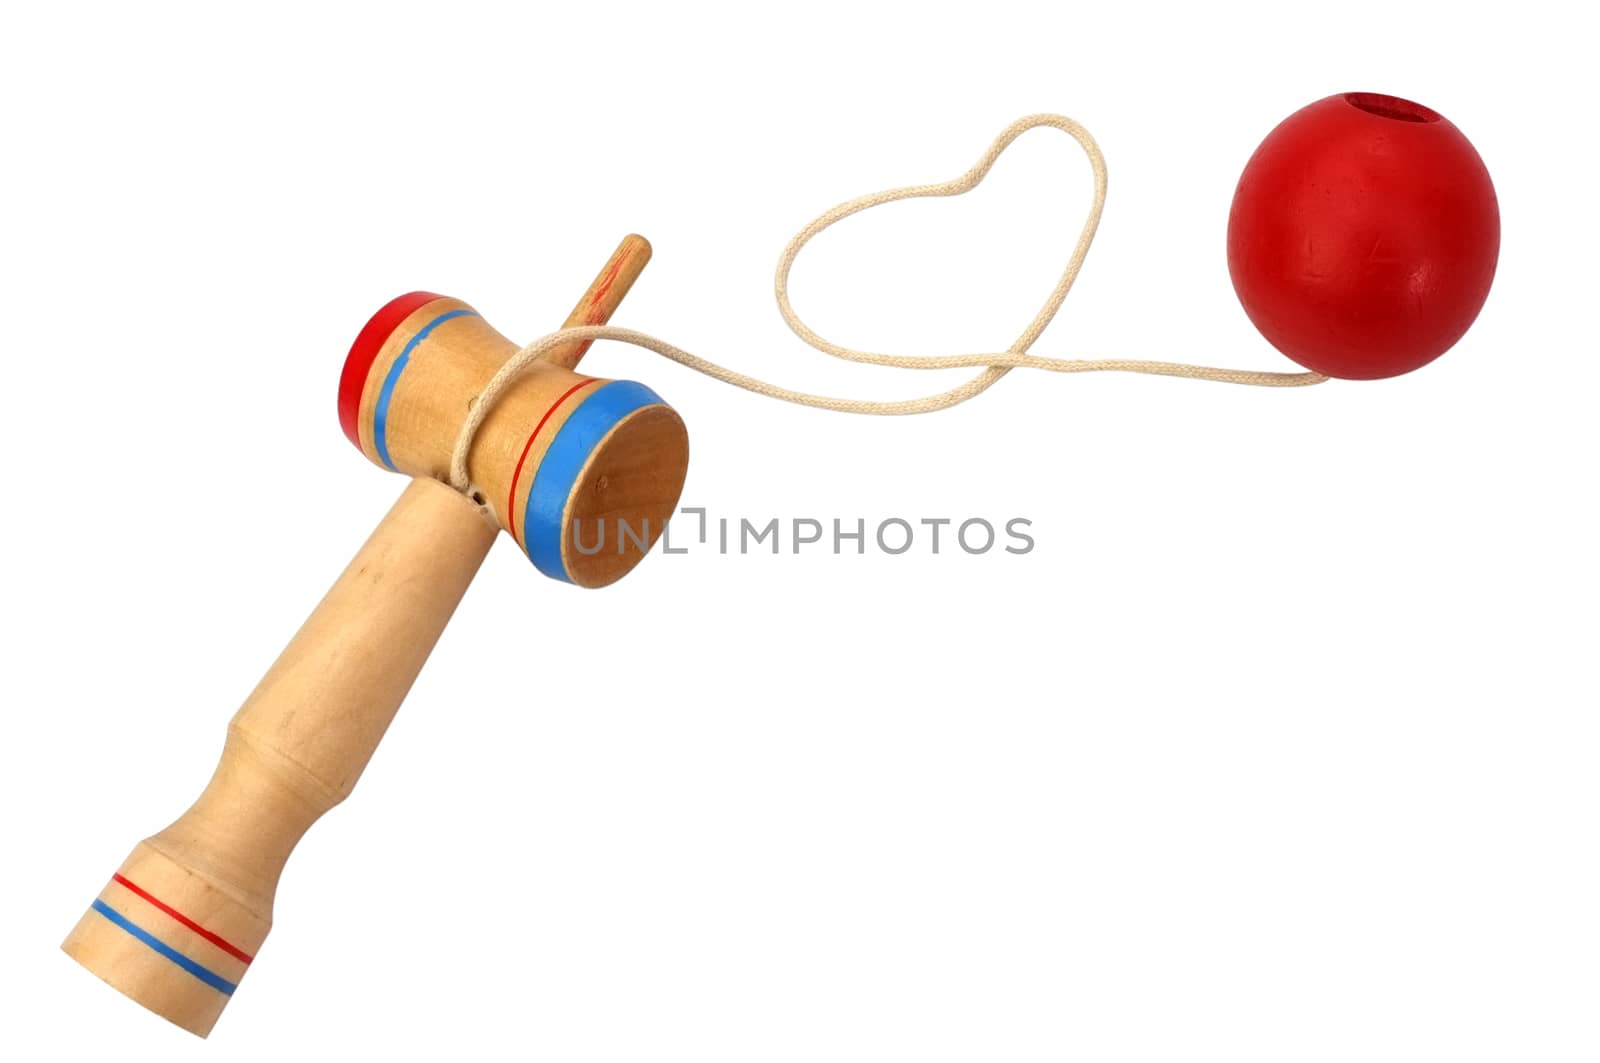 Kendama, a traditional Japanese toy consisting of a sword and a ball connected by a string rolled in heart shape by Hepjam